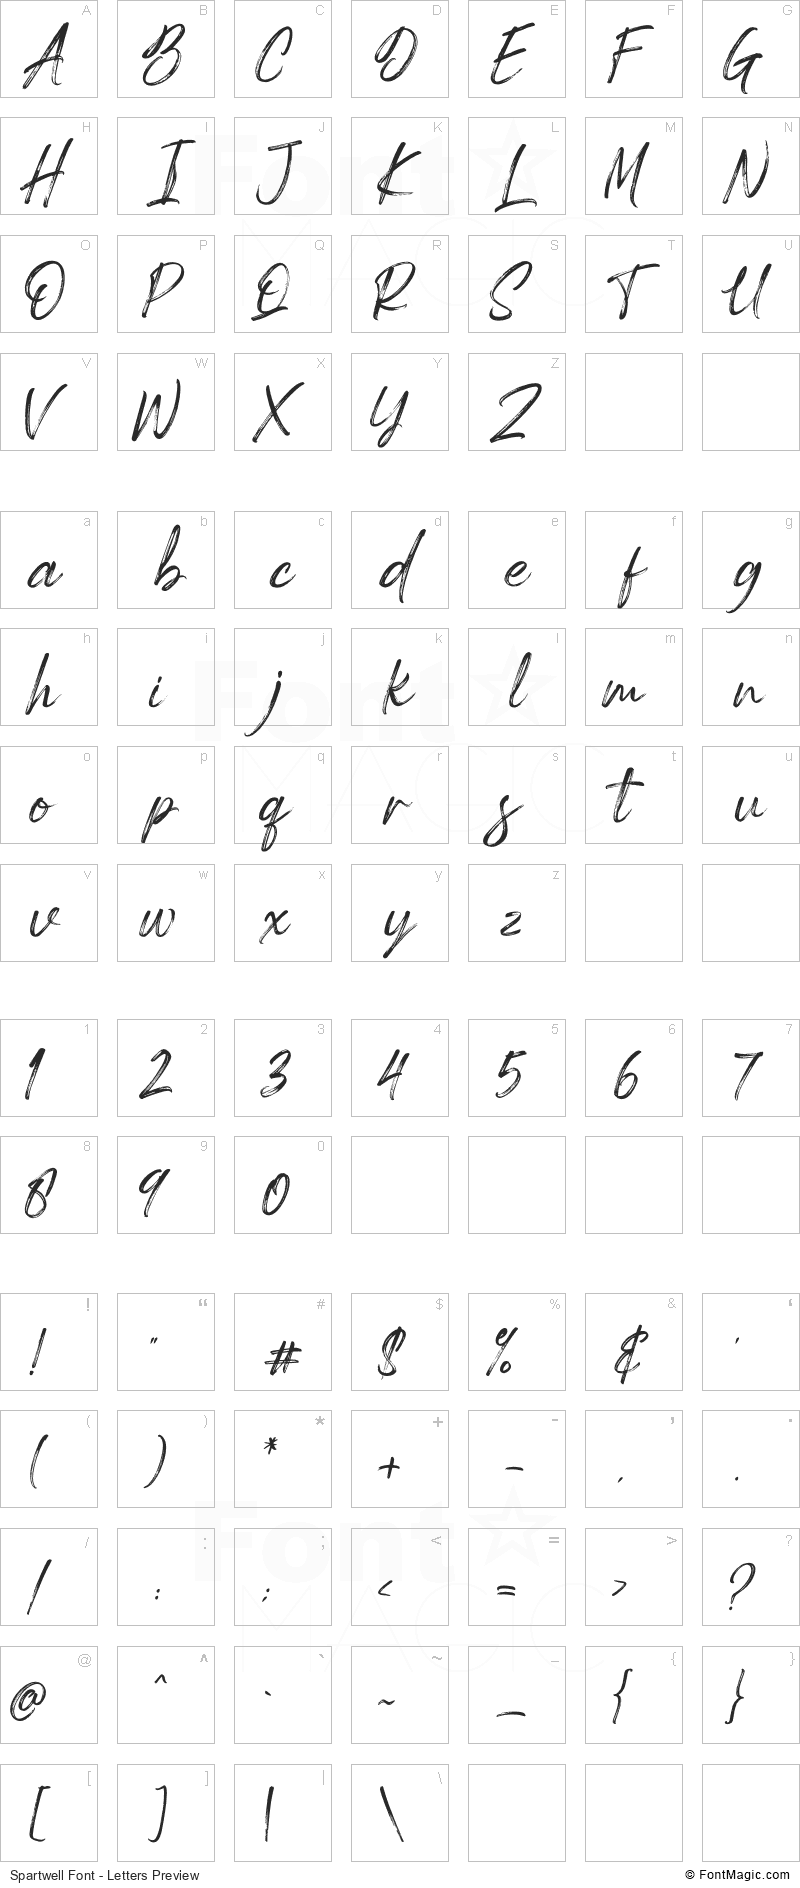 Spartwell Font - All Latters Preview Chart